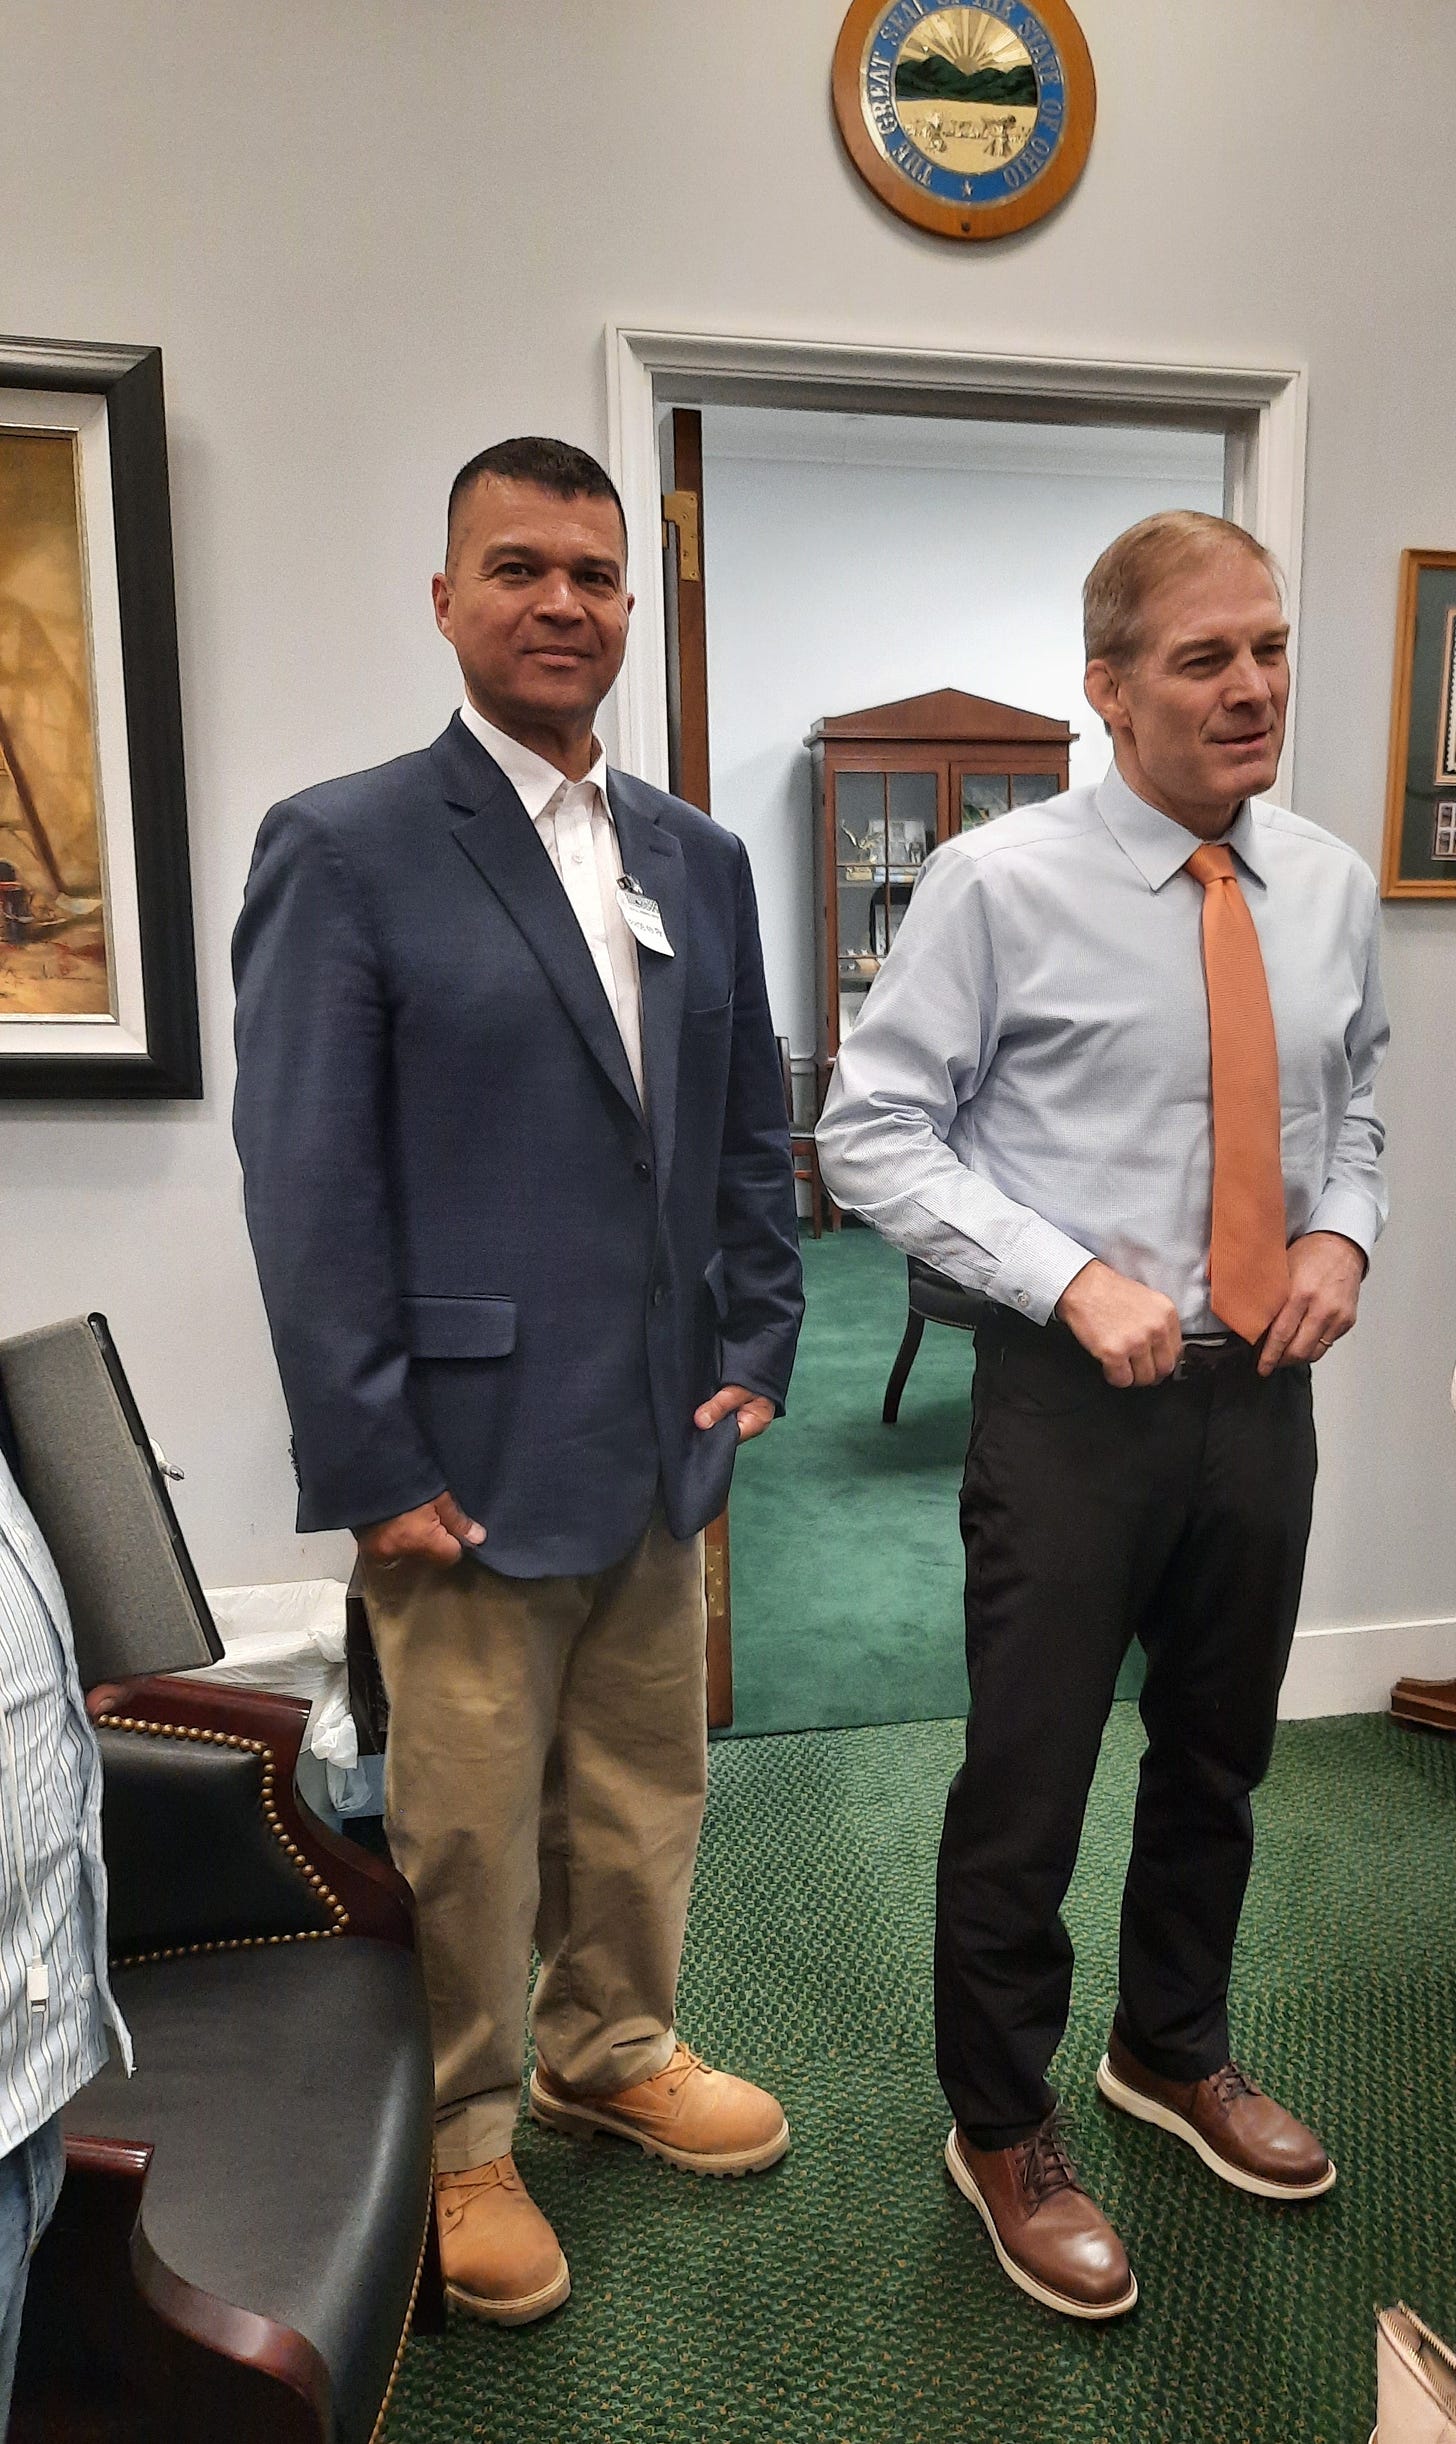 Rep jim jordan and dr paul elias alexander meeting in rep jordon 039 s congressional office this man i respect amp put a lot of trust in him now to go rambo on all covid wrongs to indict amp jail many | news